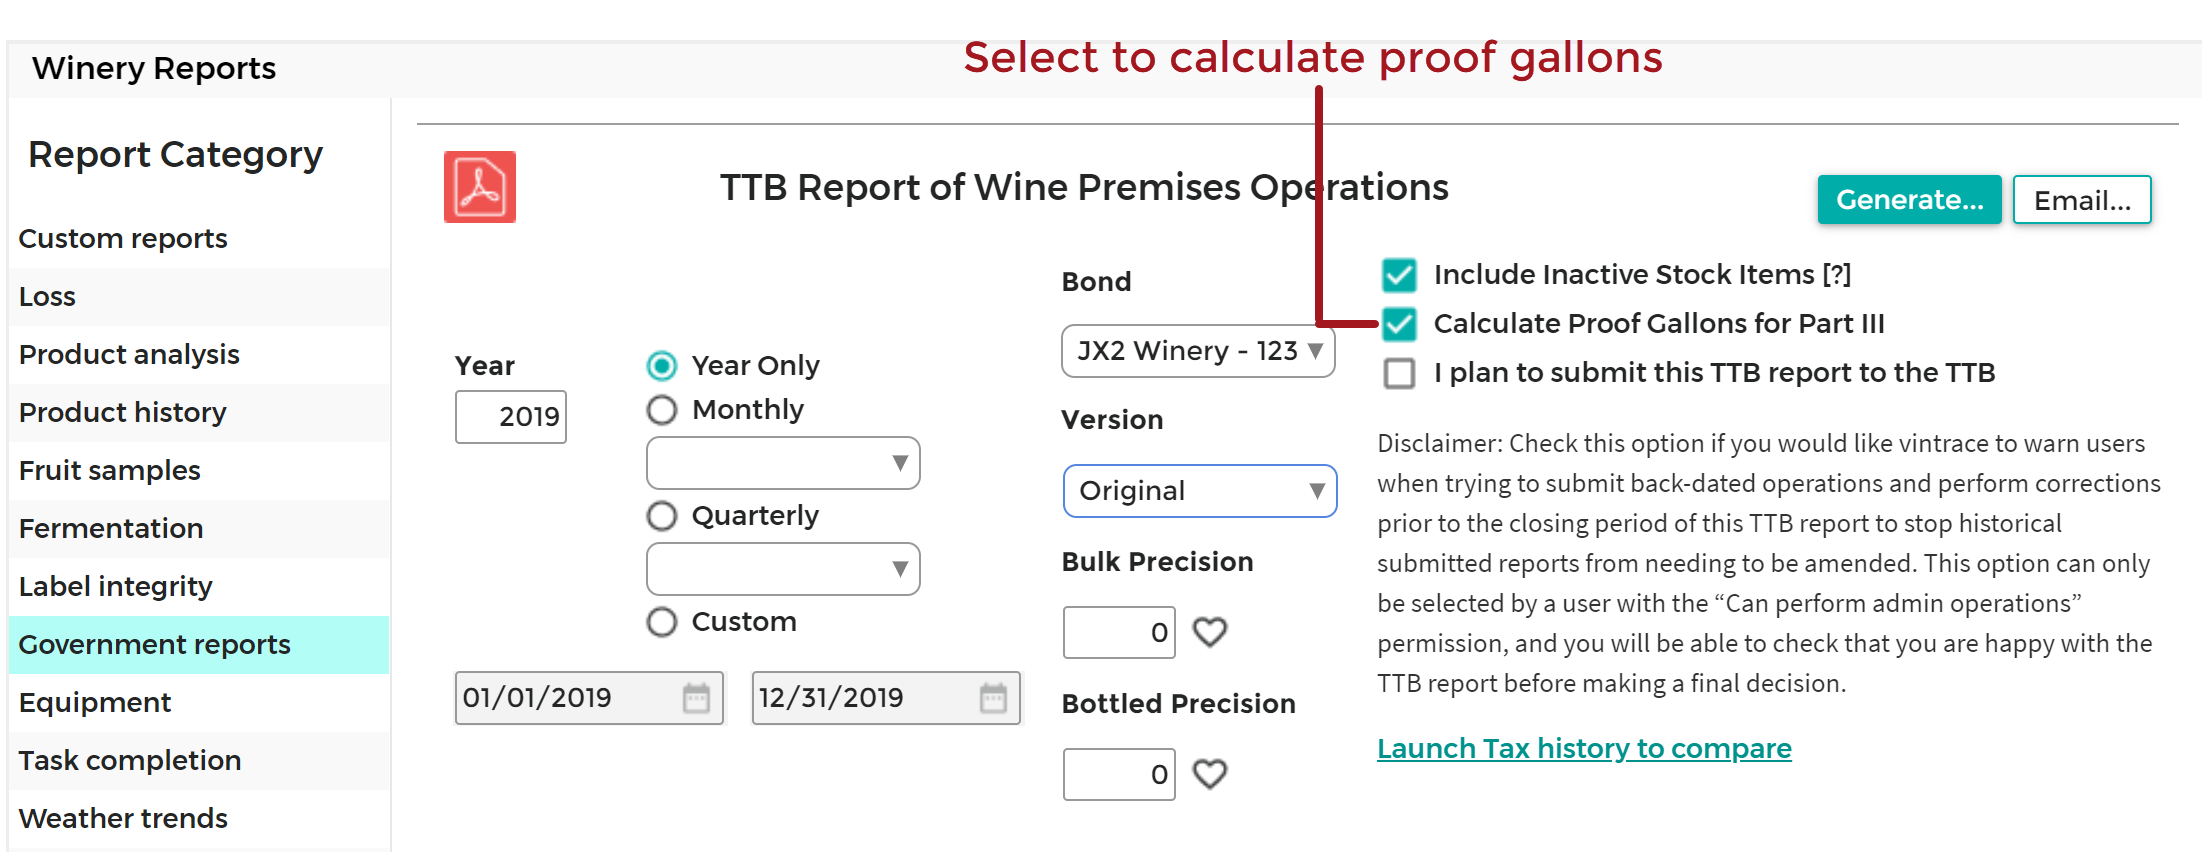 Winery_Reports_-_Government_Reports_-_TTB_-_Calc_Proof_Gallons_20200602.png